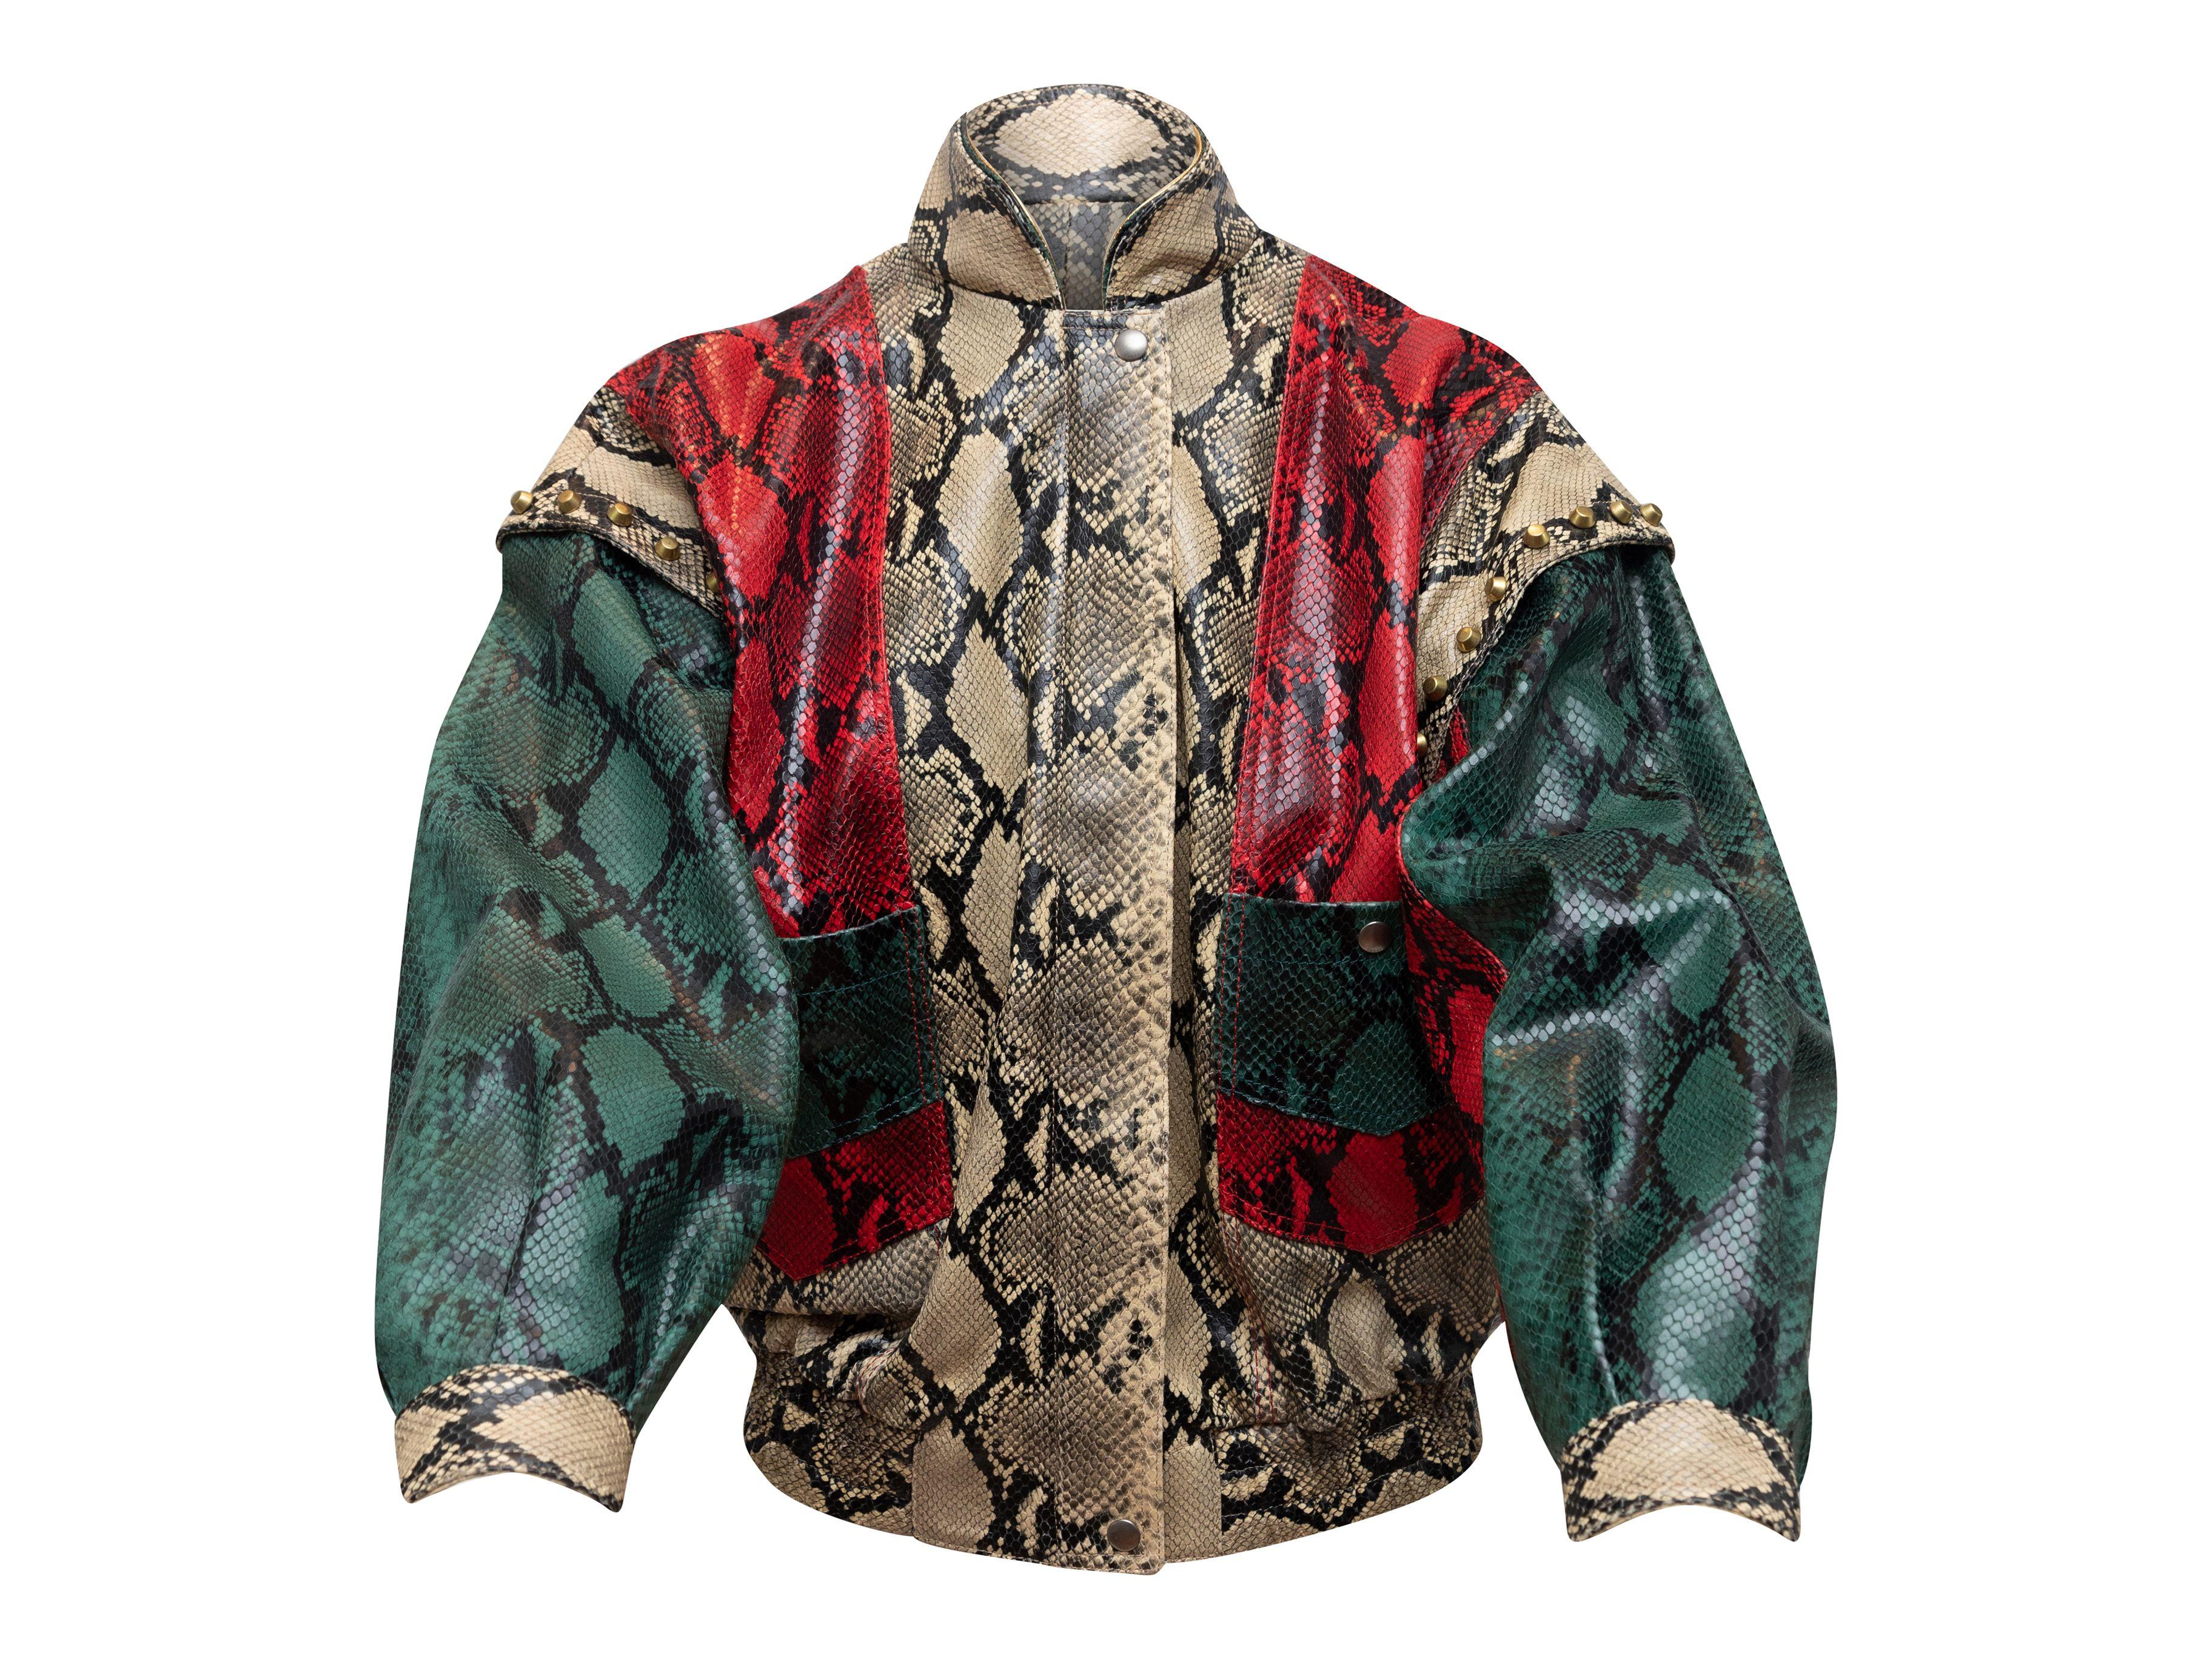 Men's Gucci Tan & Multicolor Python Printed Leather Bomber Jacket